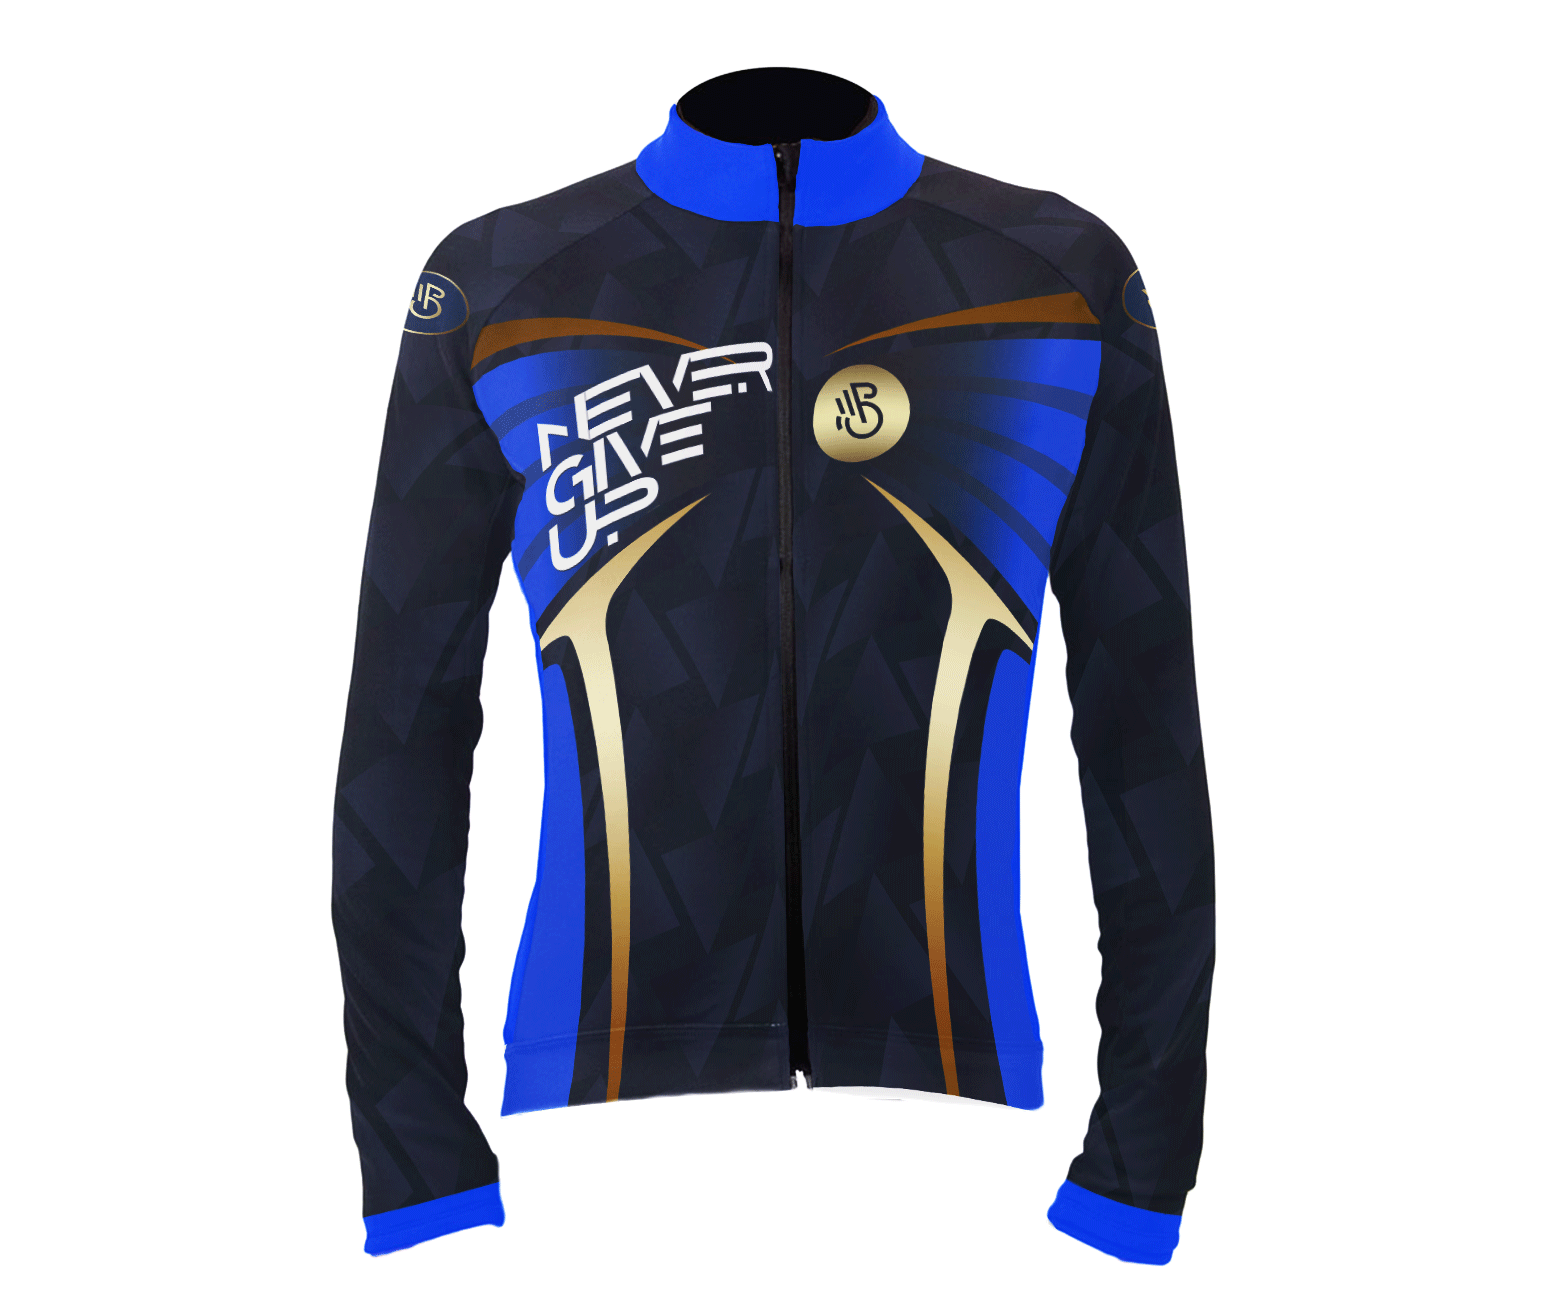 Cycling jacket NEVER GIVE UP image 1